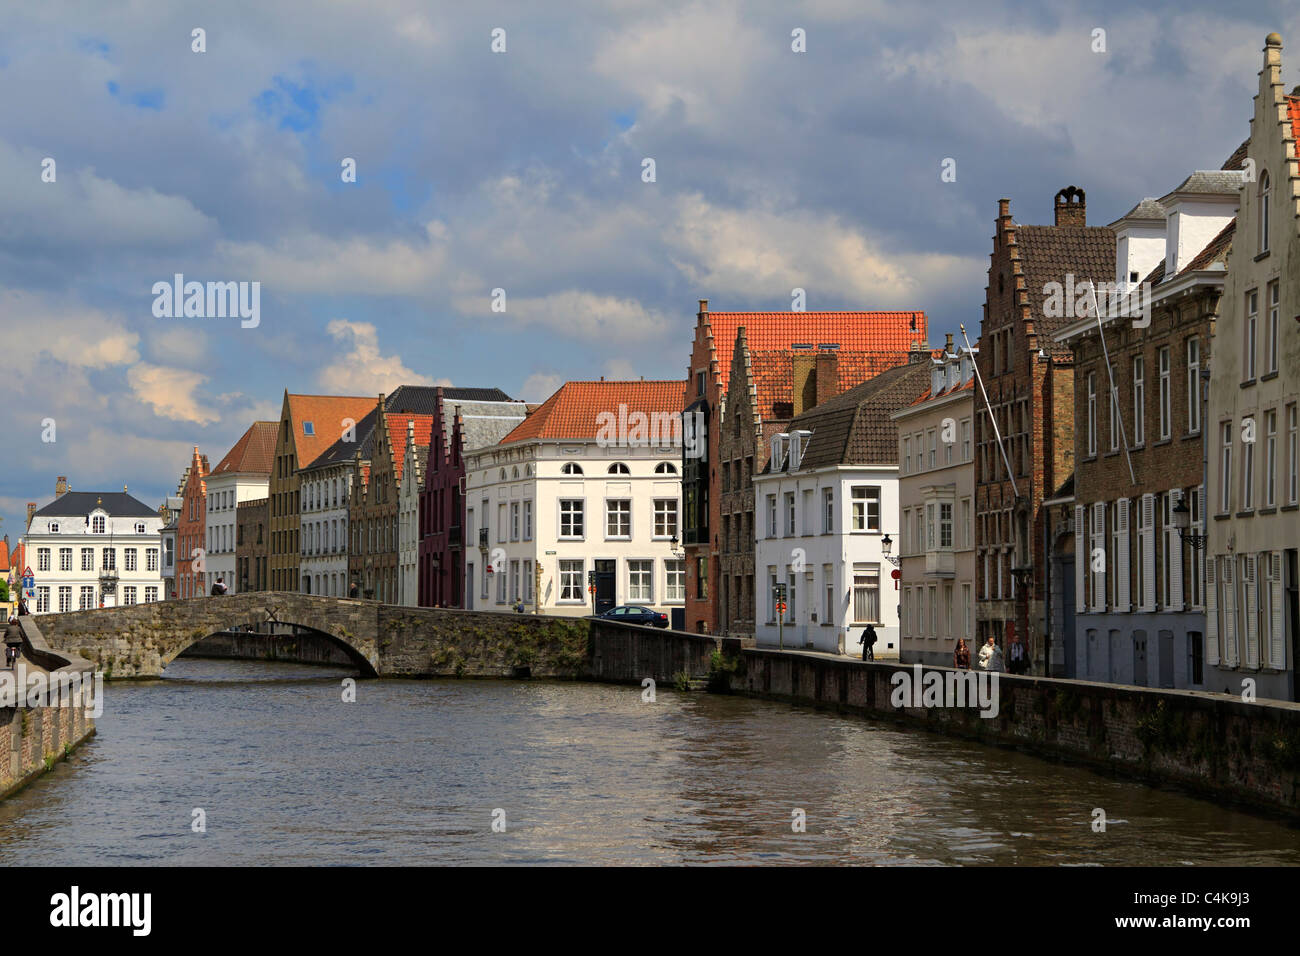 Spinolarei canal, Bruges, Belgium. Konings Brug and typical canalside houses with stepped gables and medieval architecture. Stock Photo